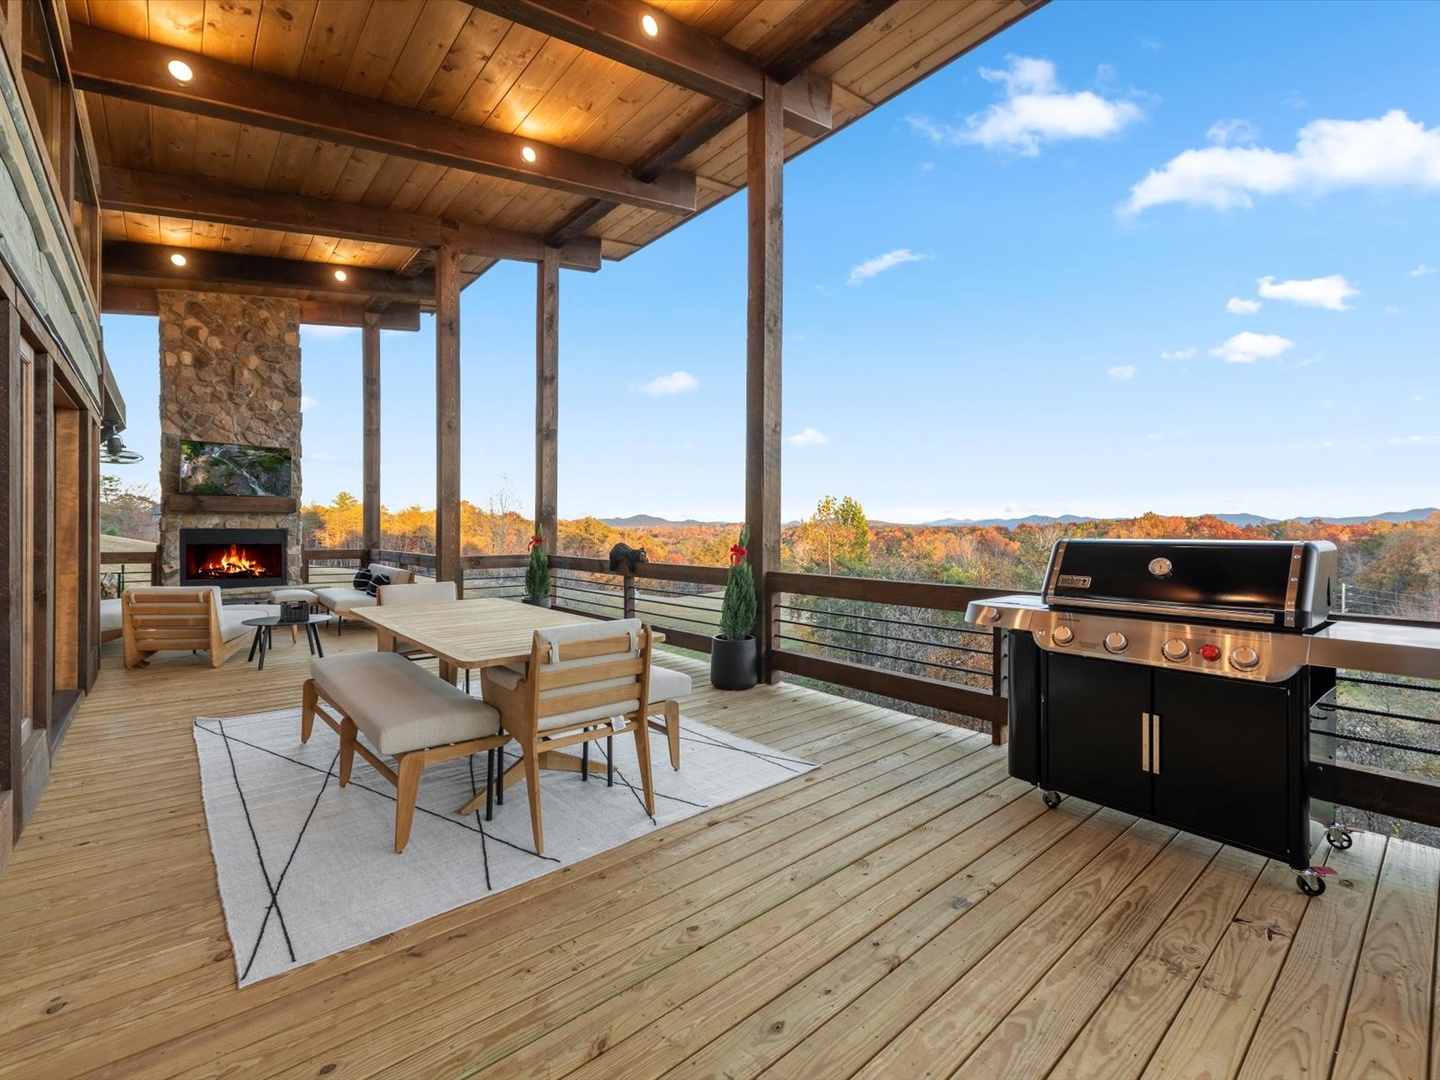 Harvest Moon - Entry Level Deck Dining Area and Grill